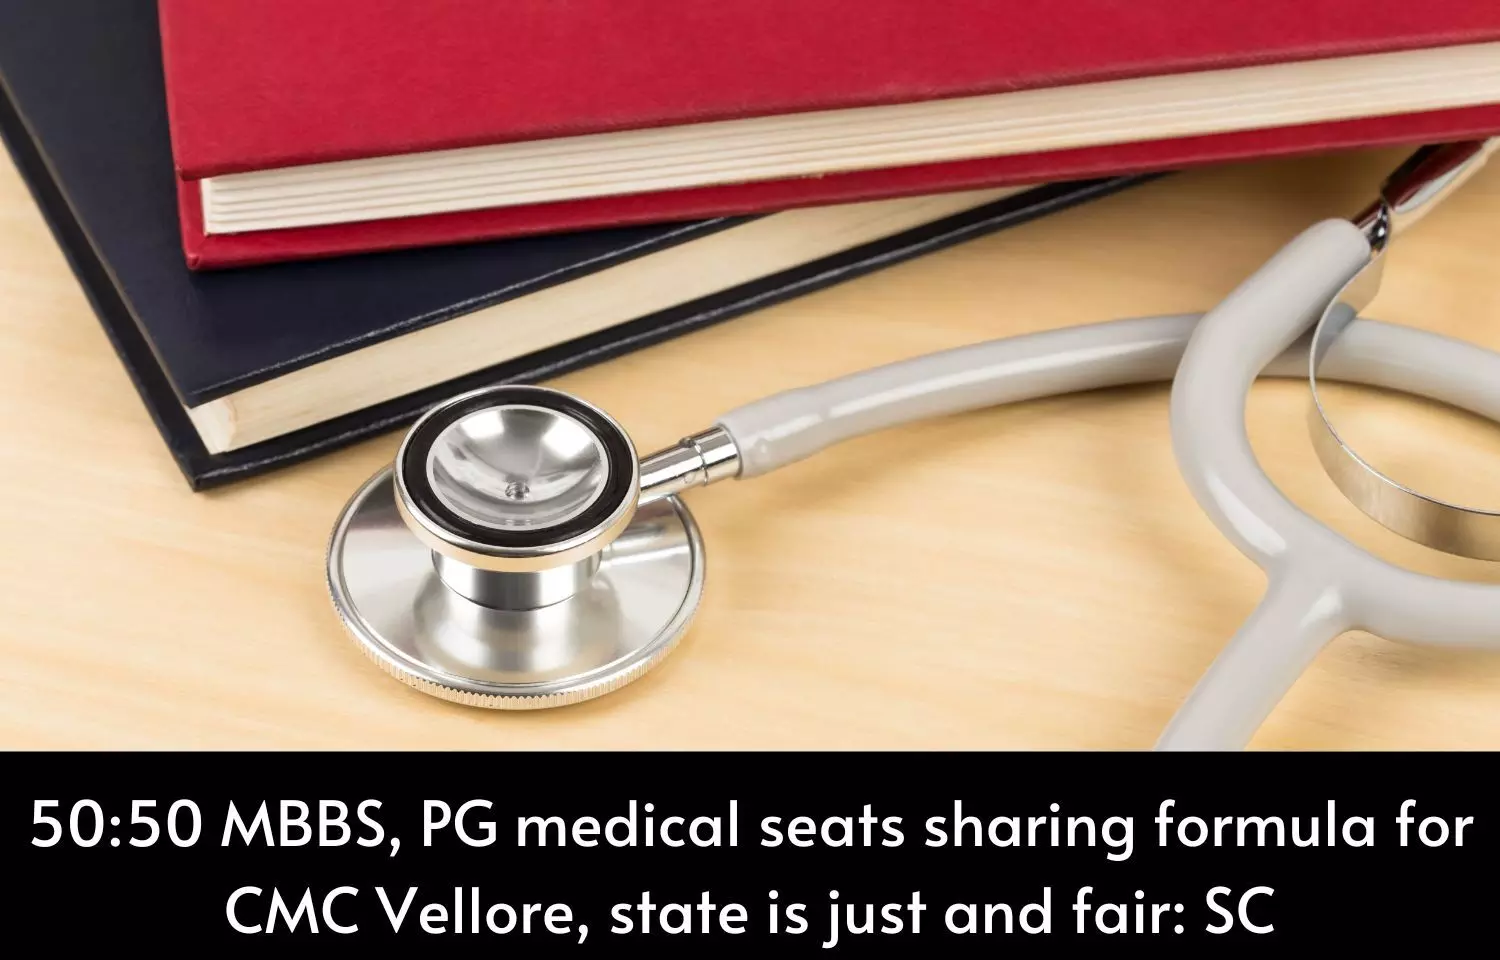 50:50 MBBS, PG medical seats sharing formula for CMC Vellore, state is just and fair: SC